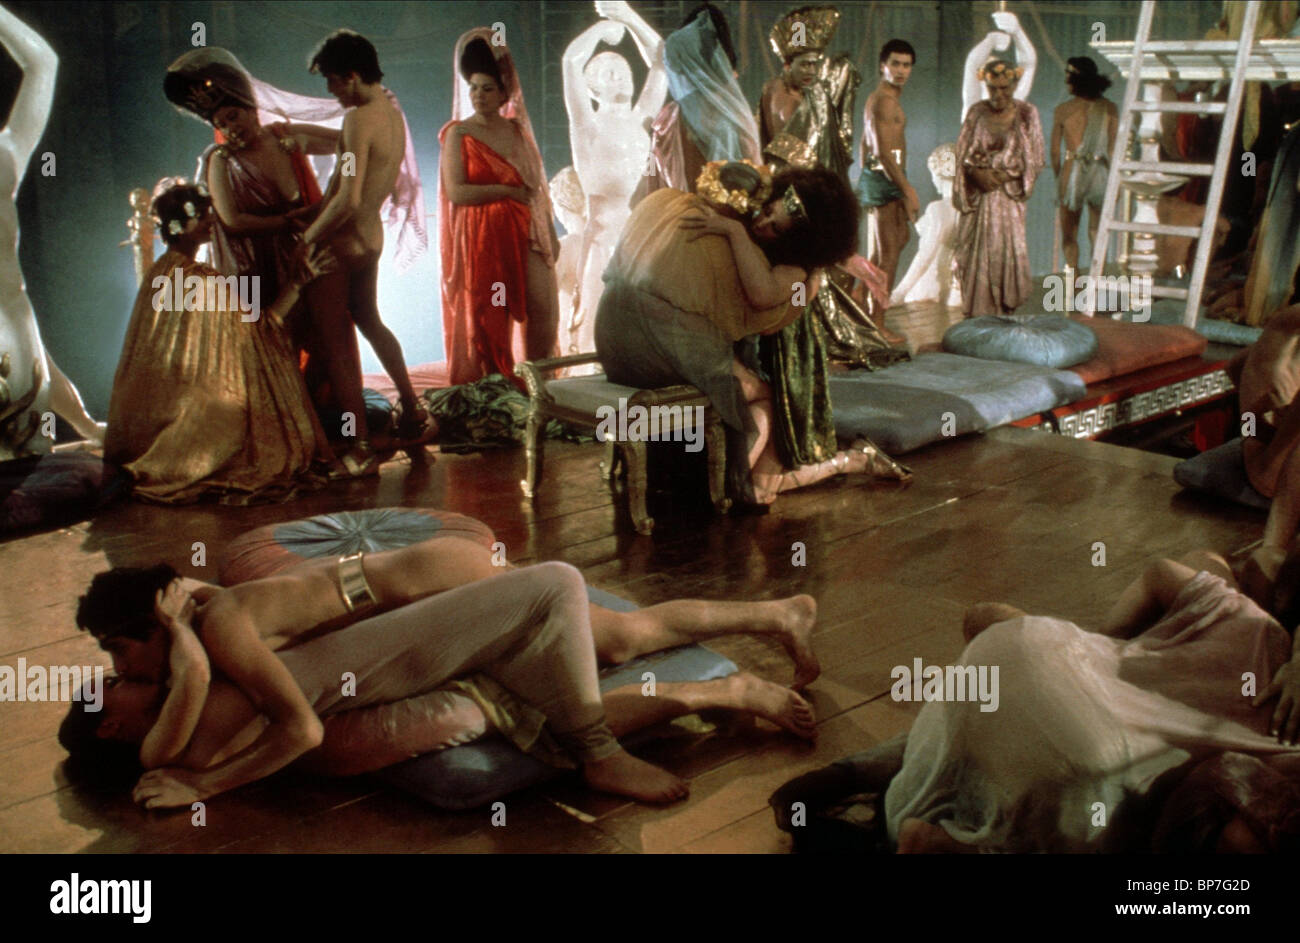 Roman Orgy Pictures 14